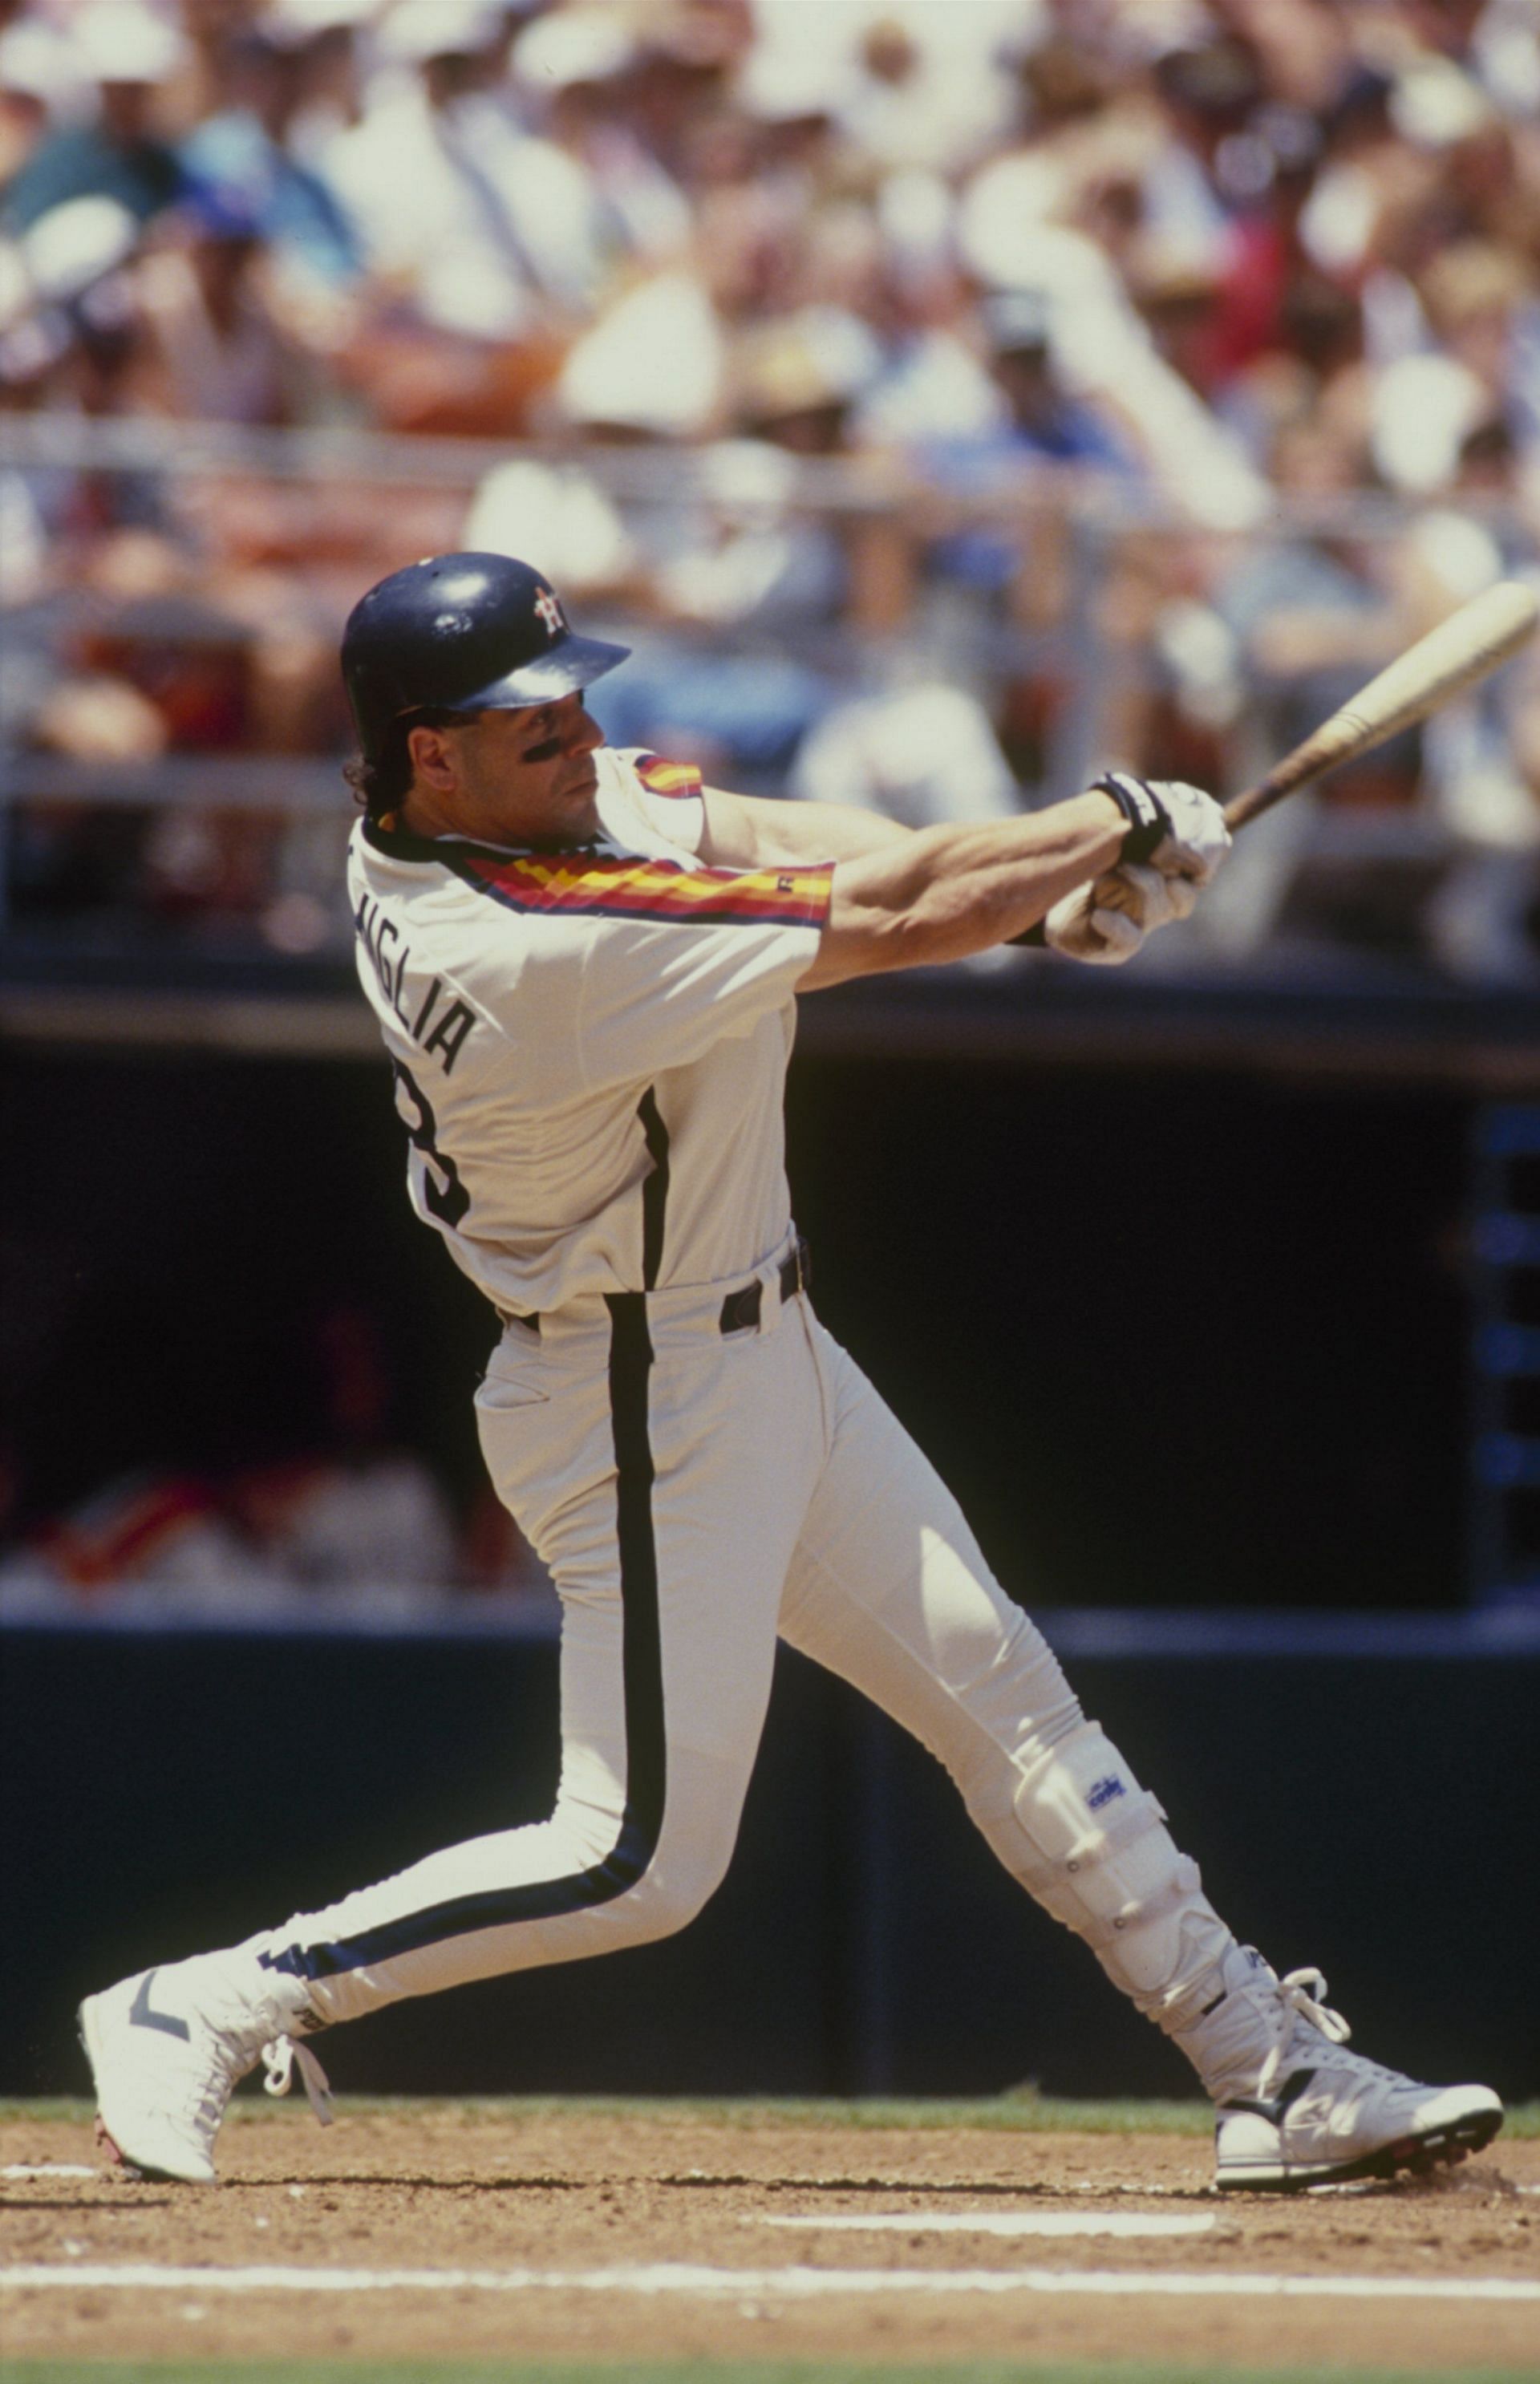 Pete Incaviglia: National College Baseball Hall of Fame, 12 year MLB  career, zero days in the minors, led the AL in Assists as a LF in 1988 -  Italian Americans in Baseball